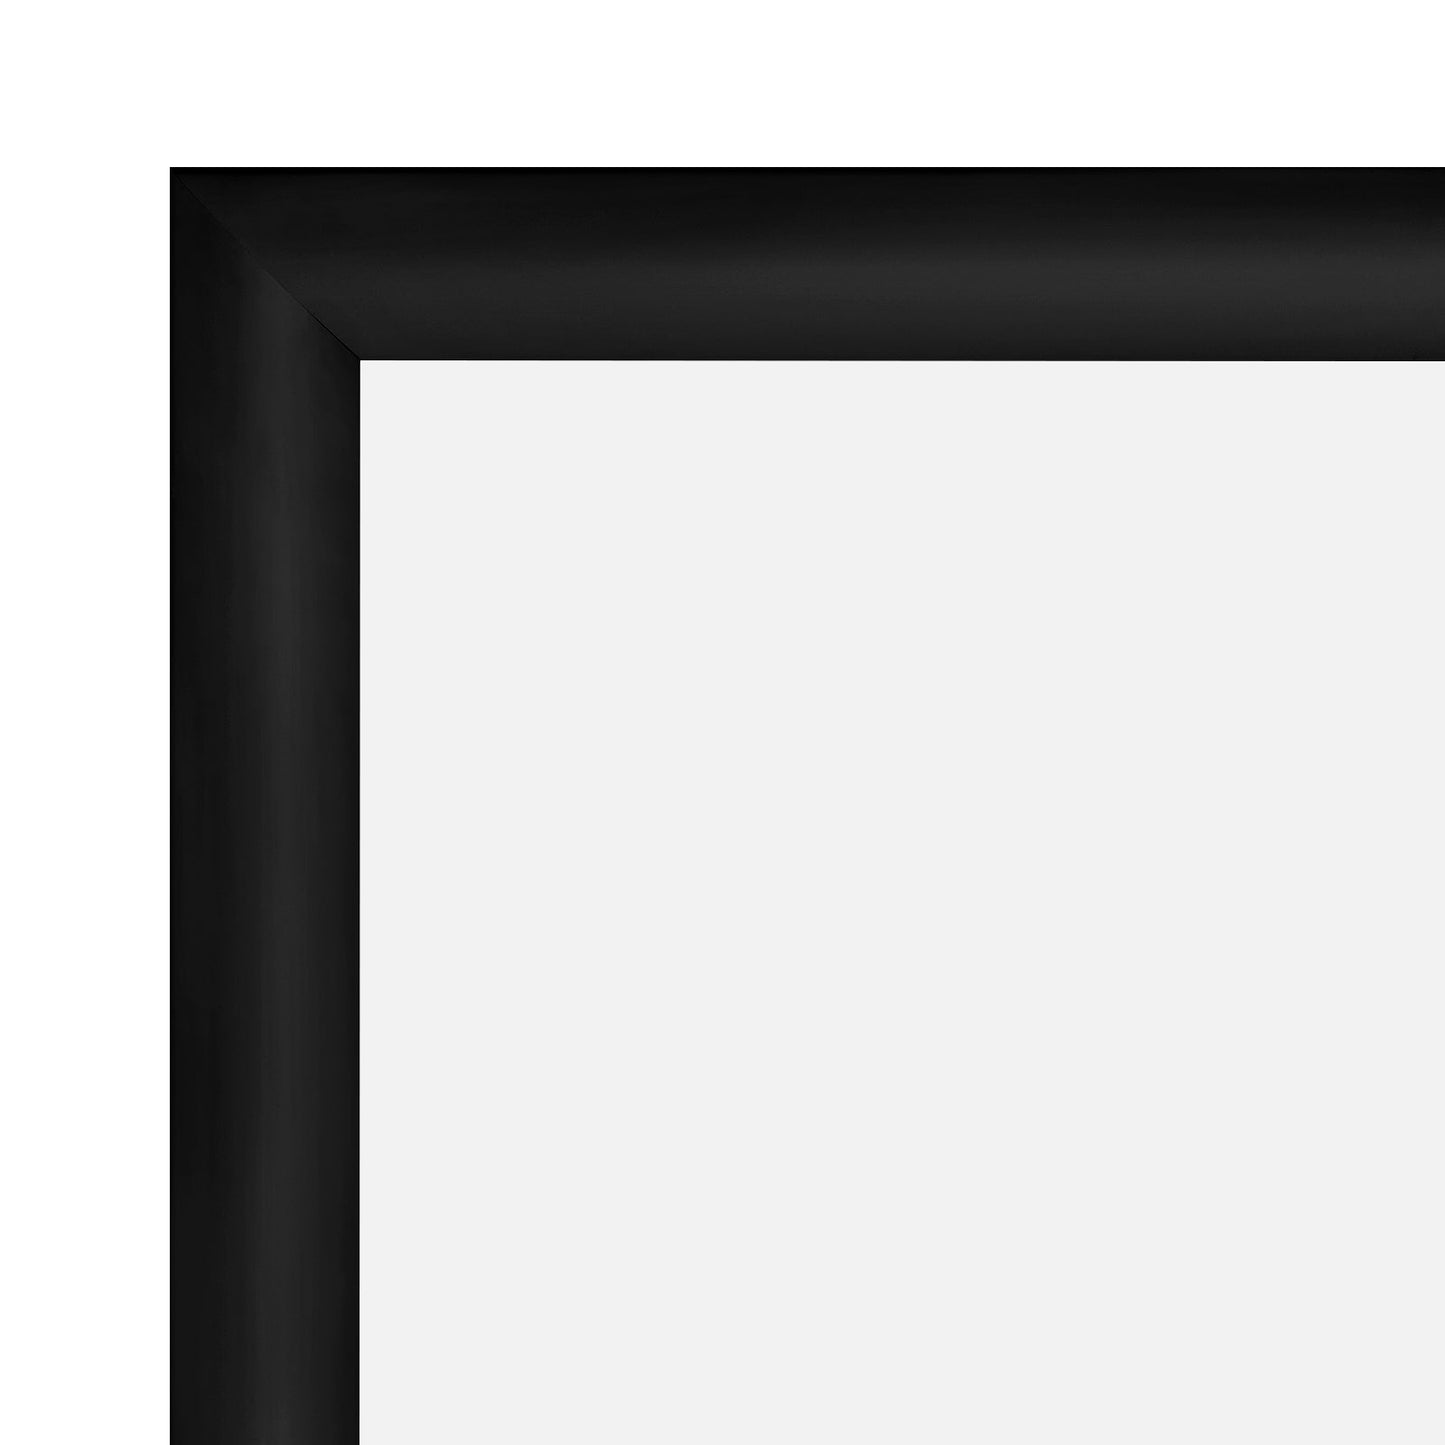 Load image into Gallery viewer, 21x30 Black SnapeZo® Snap Frame - 1.2&amp;quot; Profile
